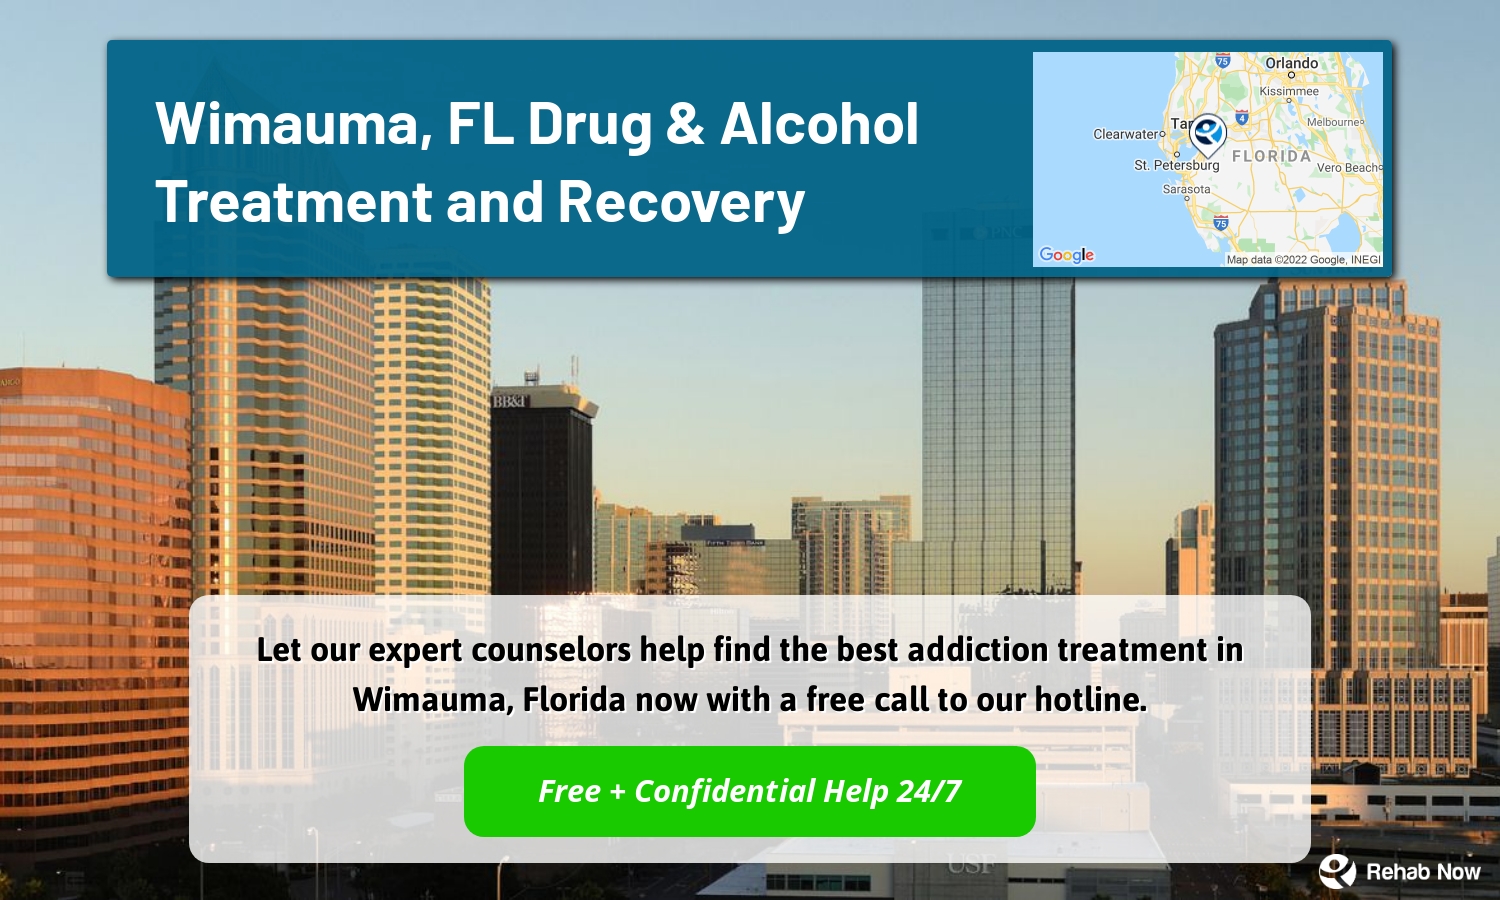 Let our expert counselors help find the best addiction treatment in Wimauma, Florida now with a free call to our hotline.